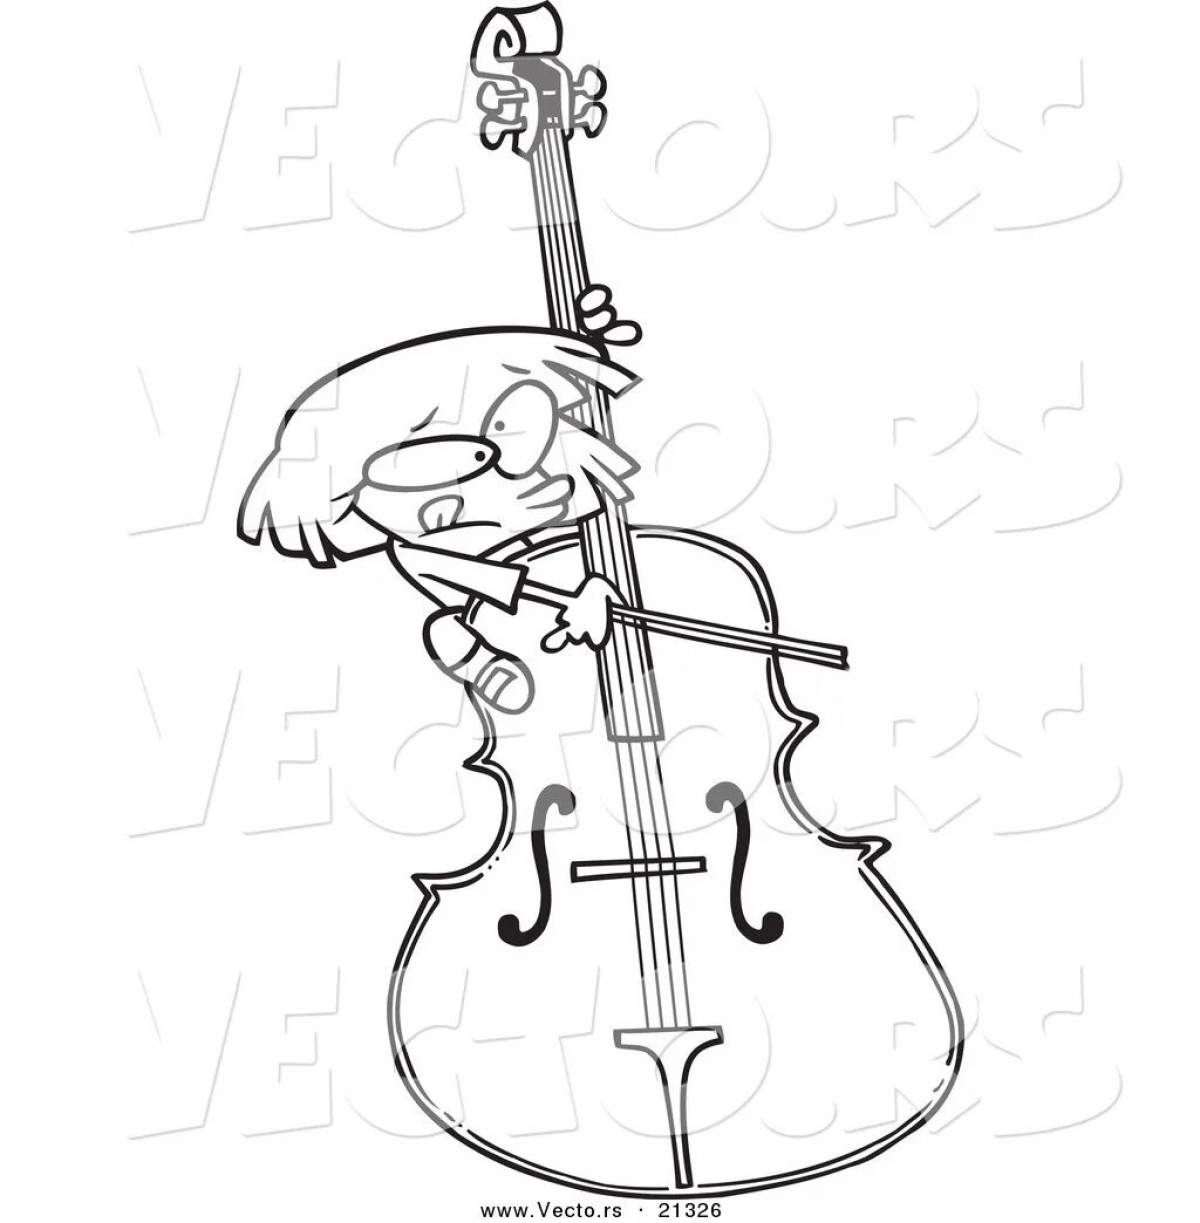 Exciting violin and cello coloring page